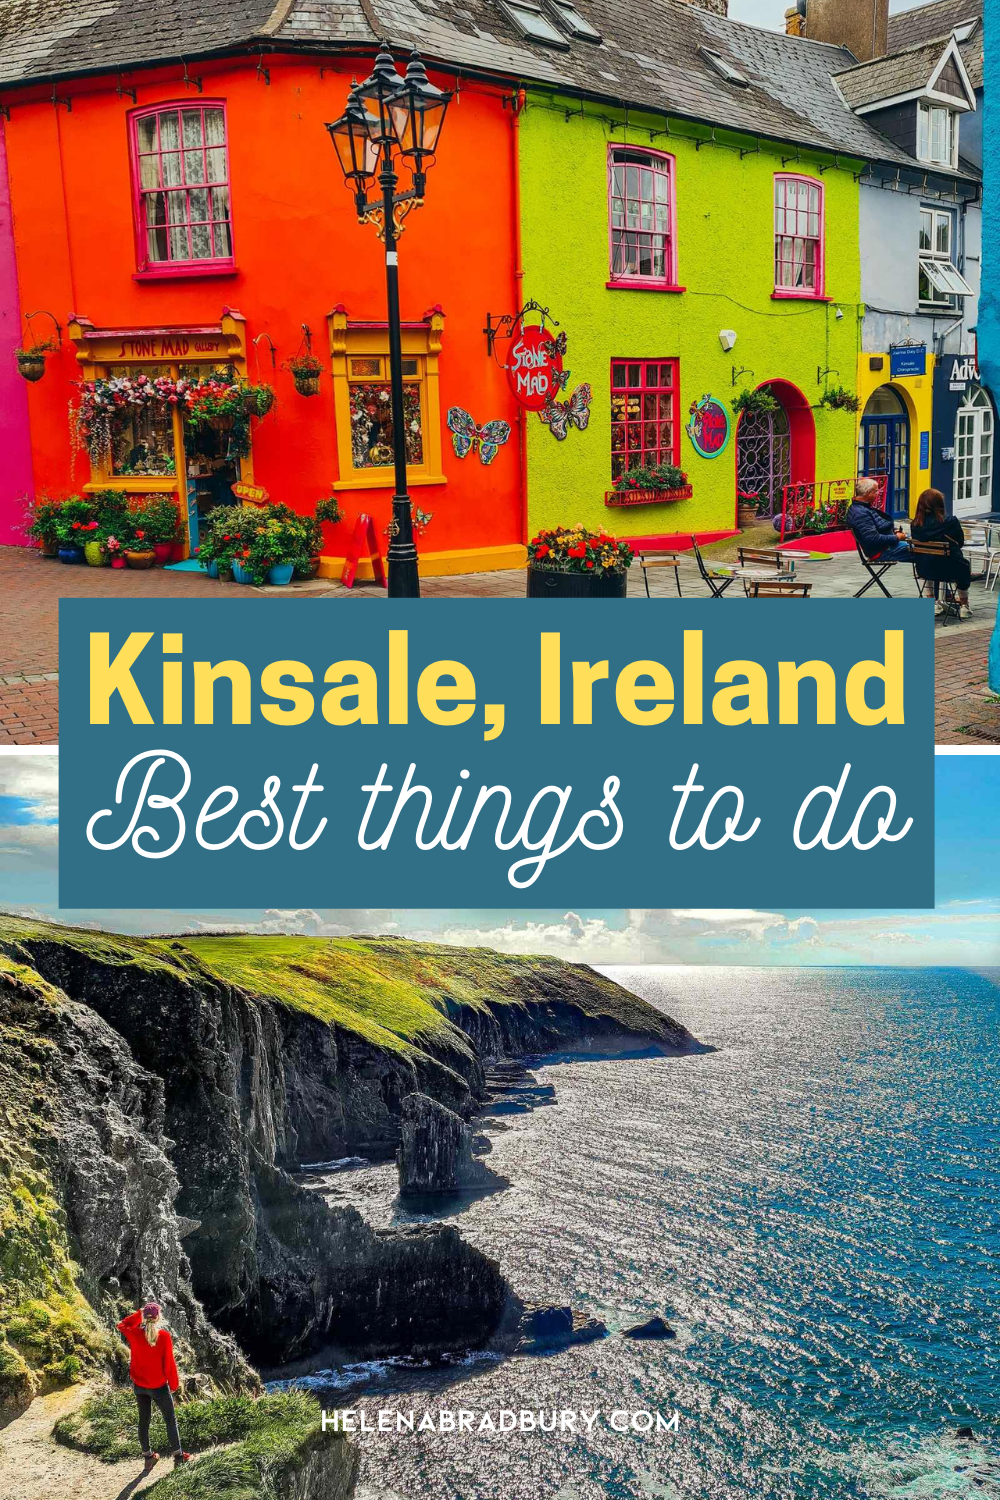 Pinnable image with 2 images of Kinsale, Ireland that reads, "Kinsale, Ireland, Best things to do"